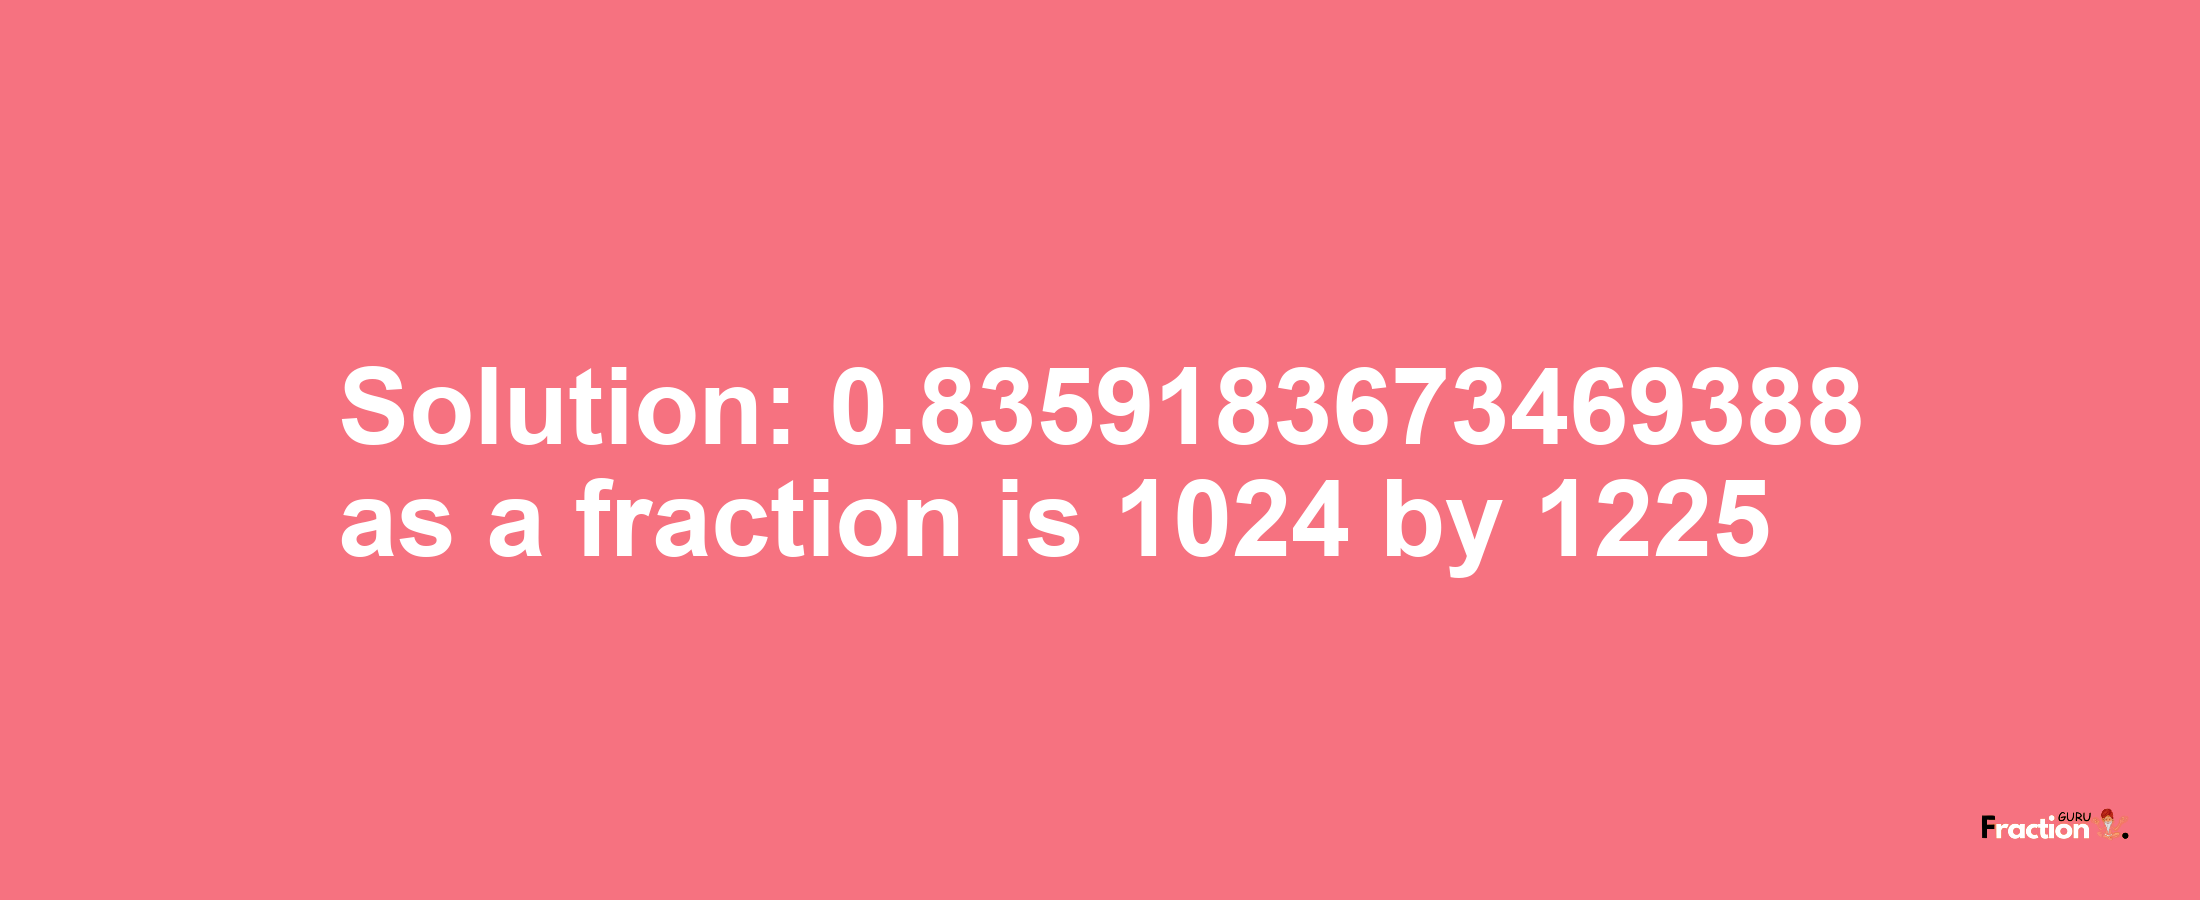 Solution:0.8359183673469388 as a fraction is 1024/1225